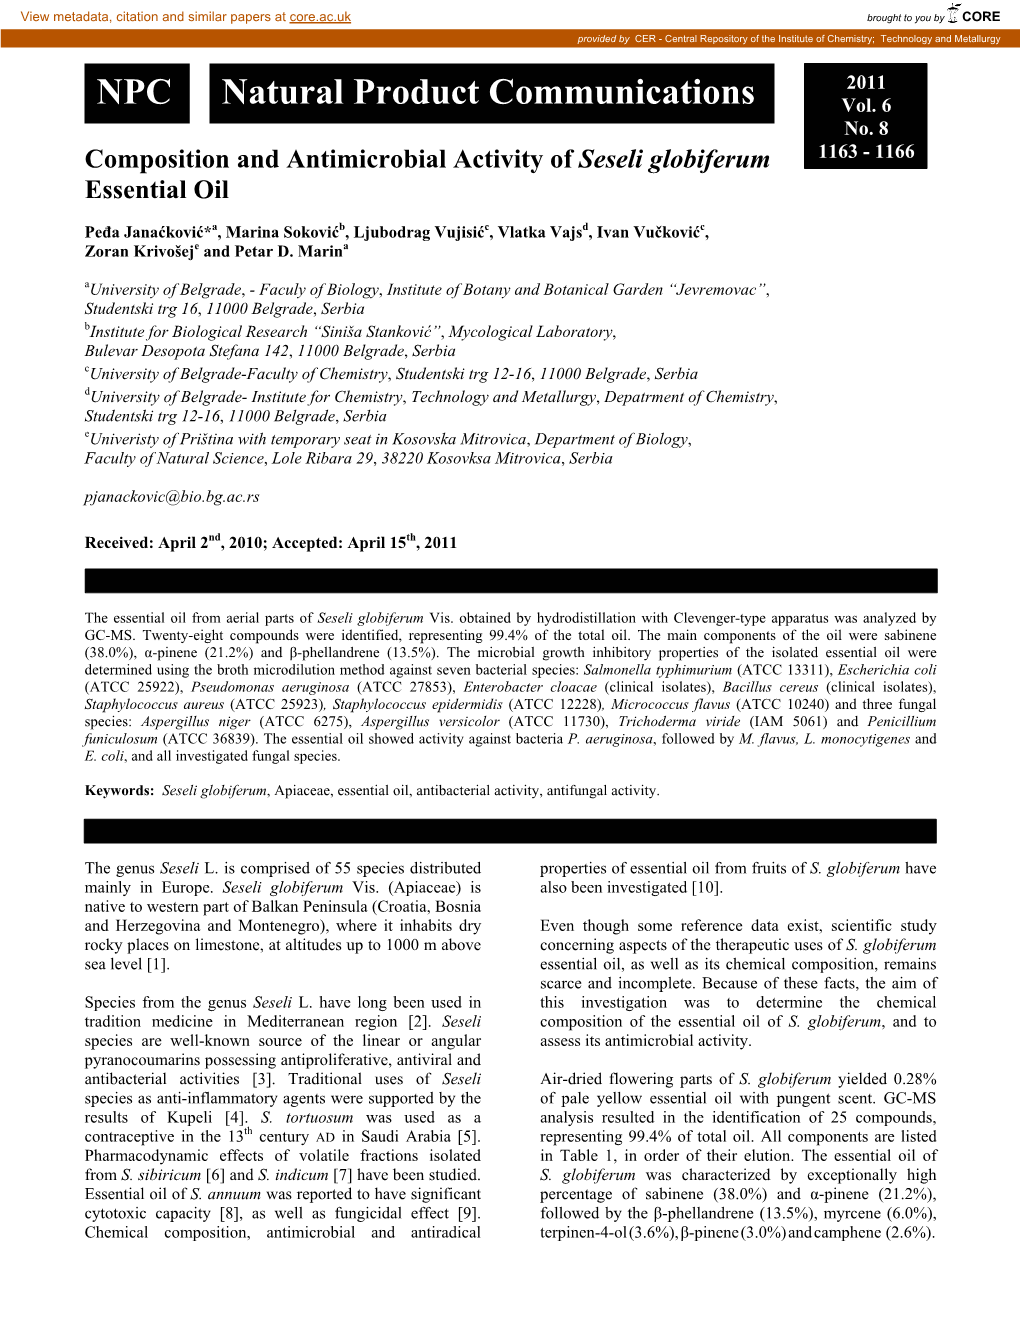 Composition and Antimicrobial Activity of Seseli Globiferum Essential